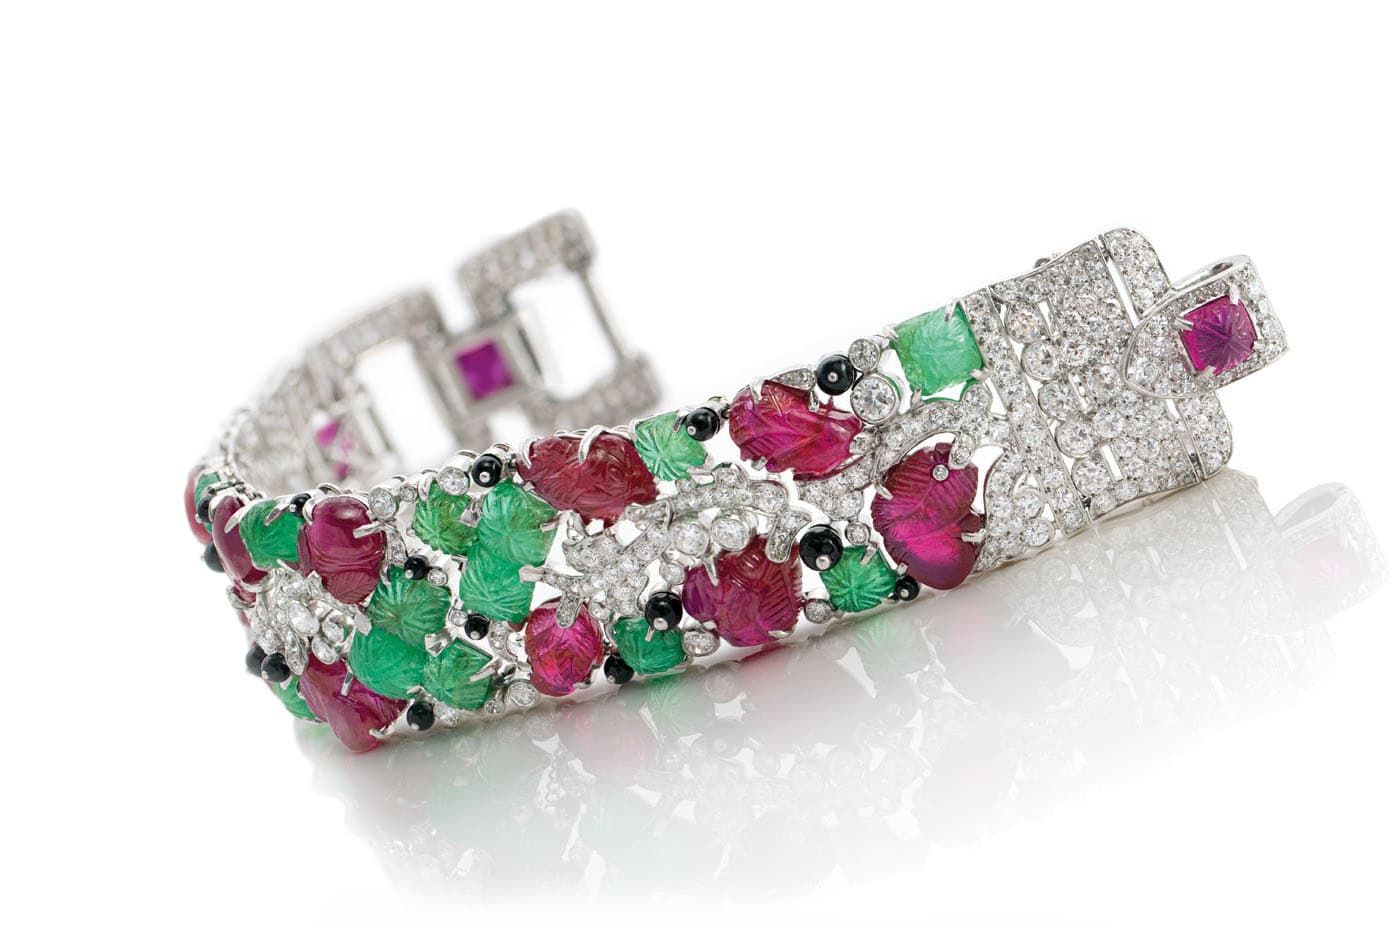 An Art Deco multi-gemstone ‘Tutti Frutti’ style bracelet, created by Cartier, and sold by Christie’s in November 2020